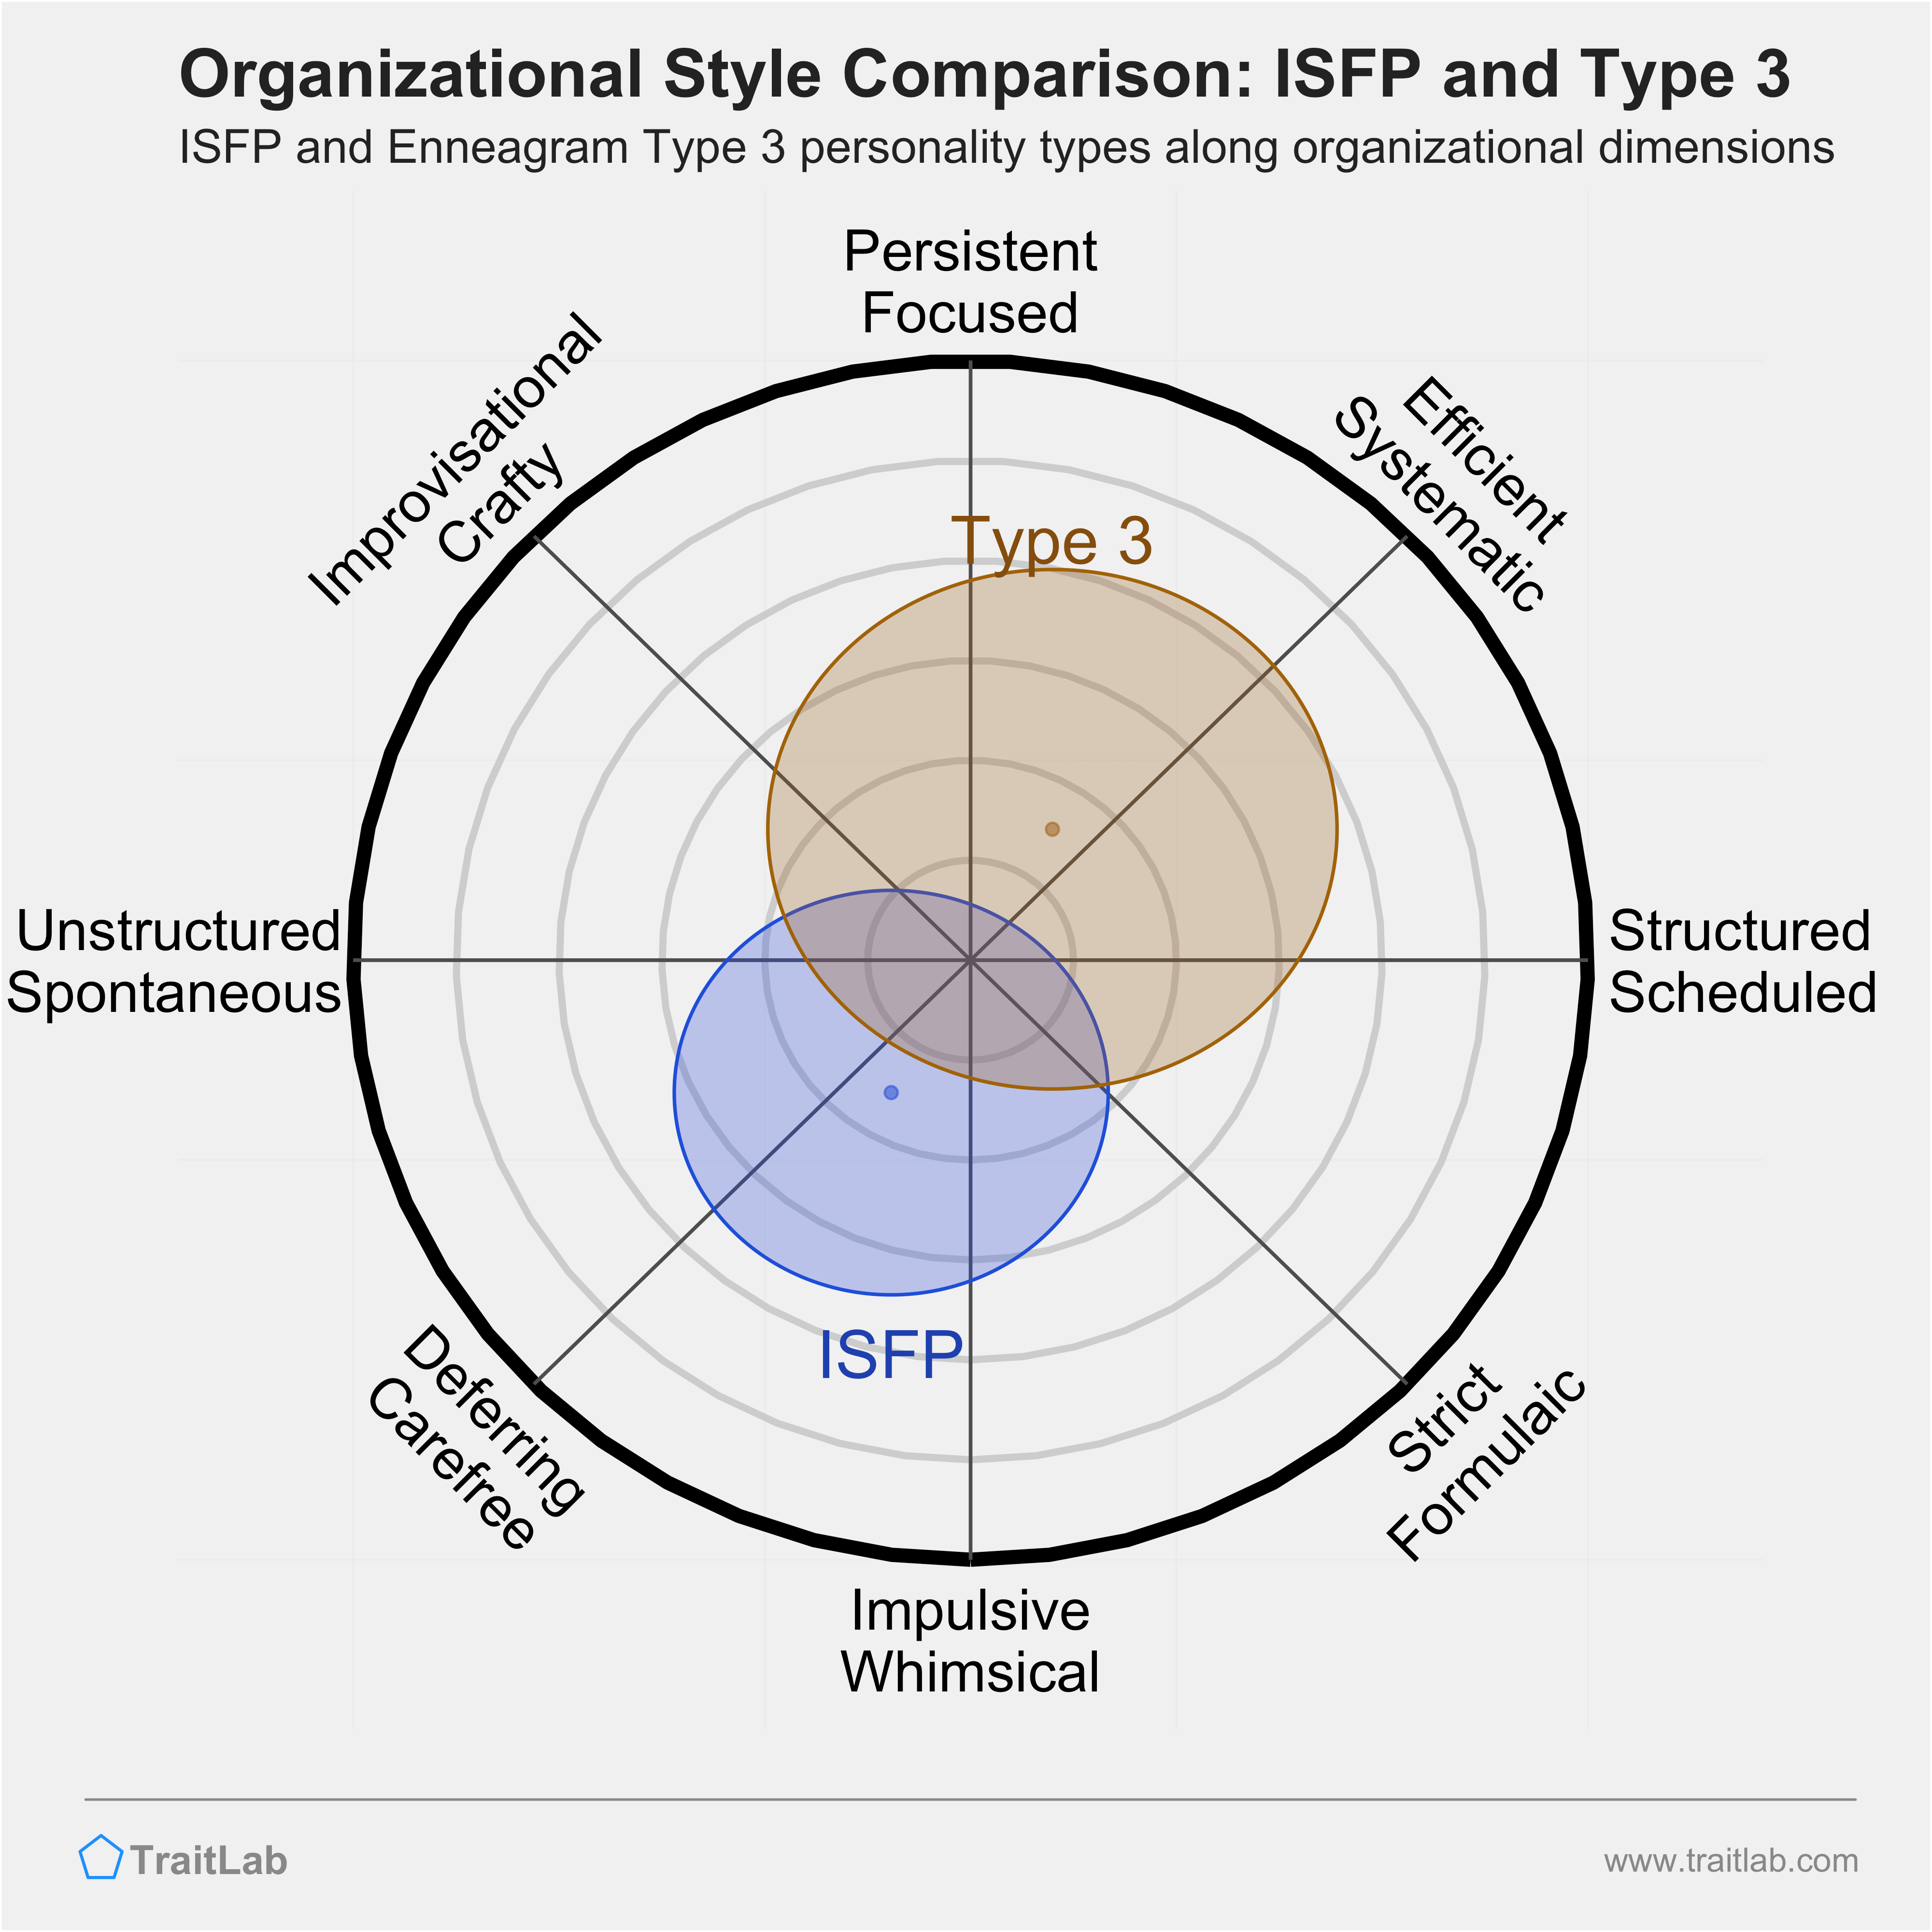 ISFP and Type 3 comparison across organizational dimensions